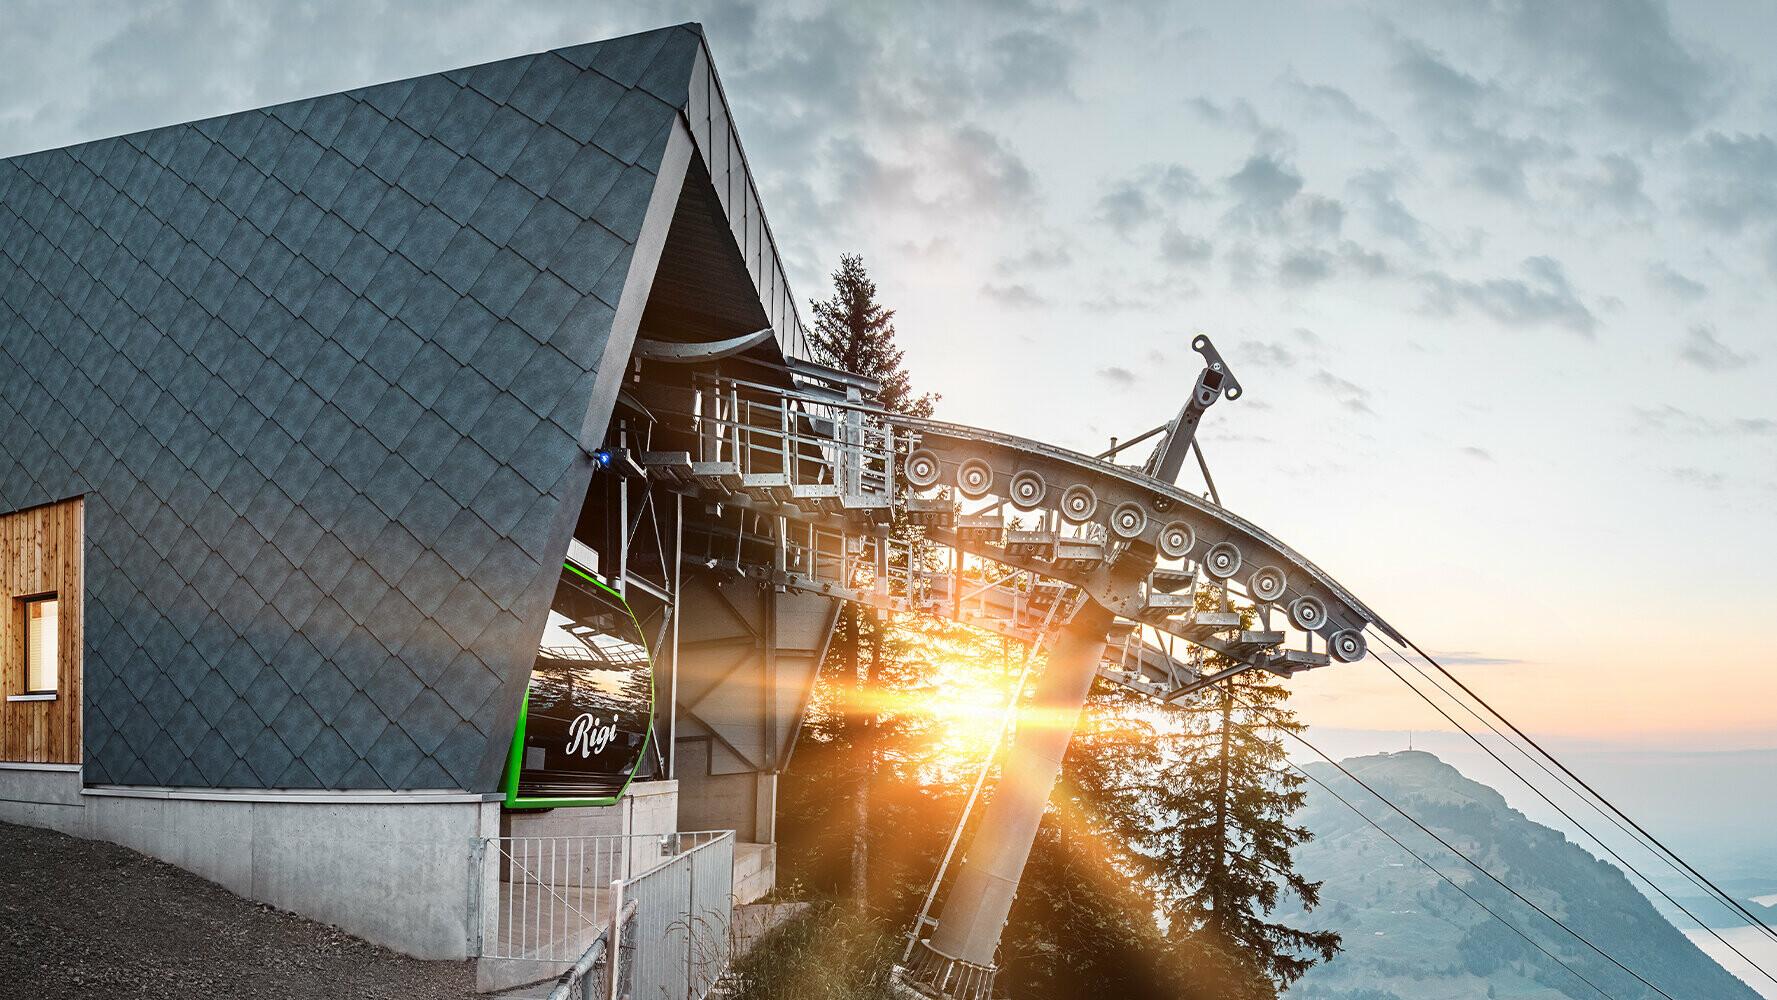 Cable car with PREFA roof and façade in Switzerland at sunset.